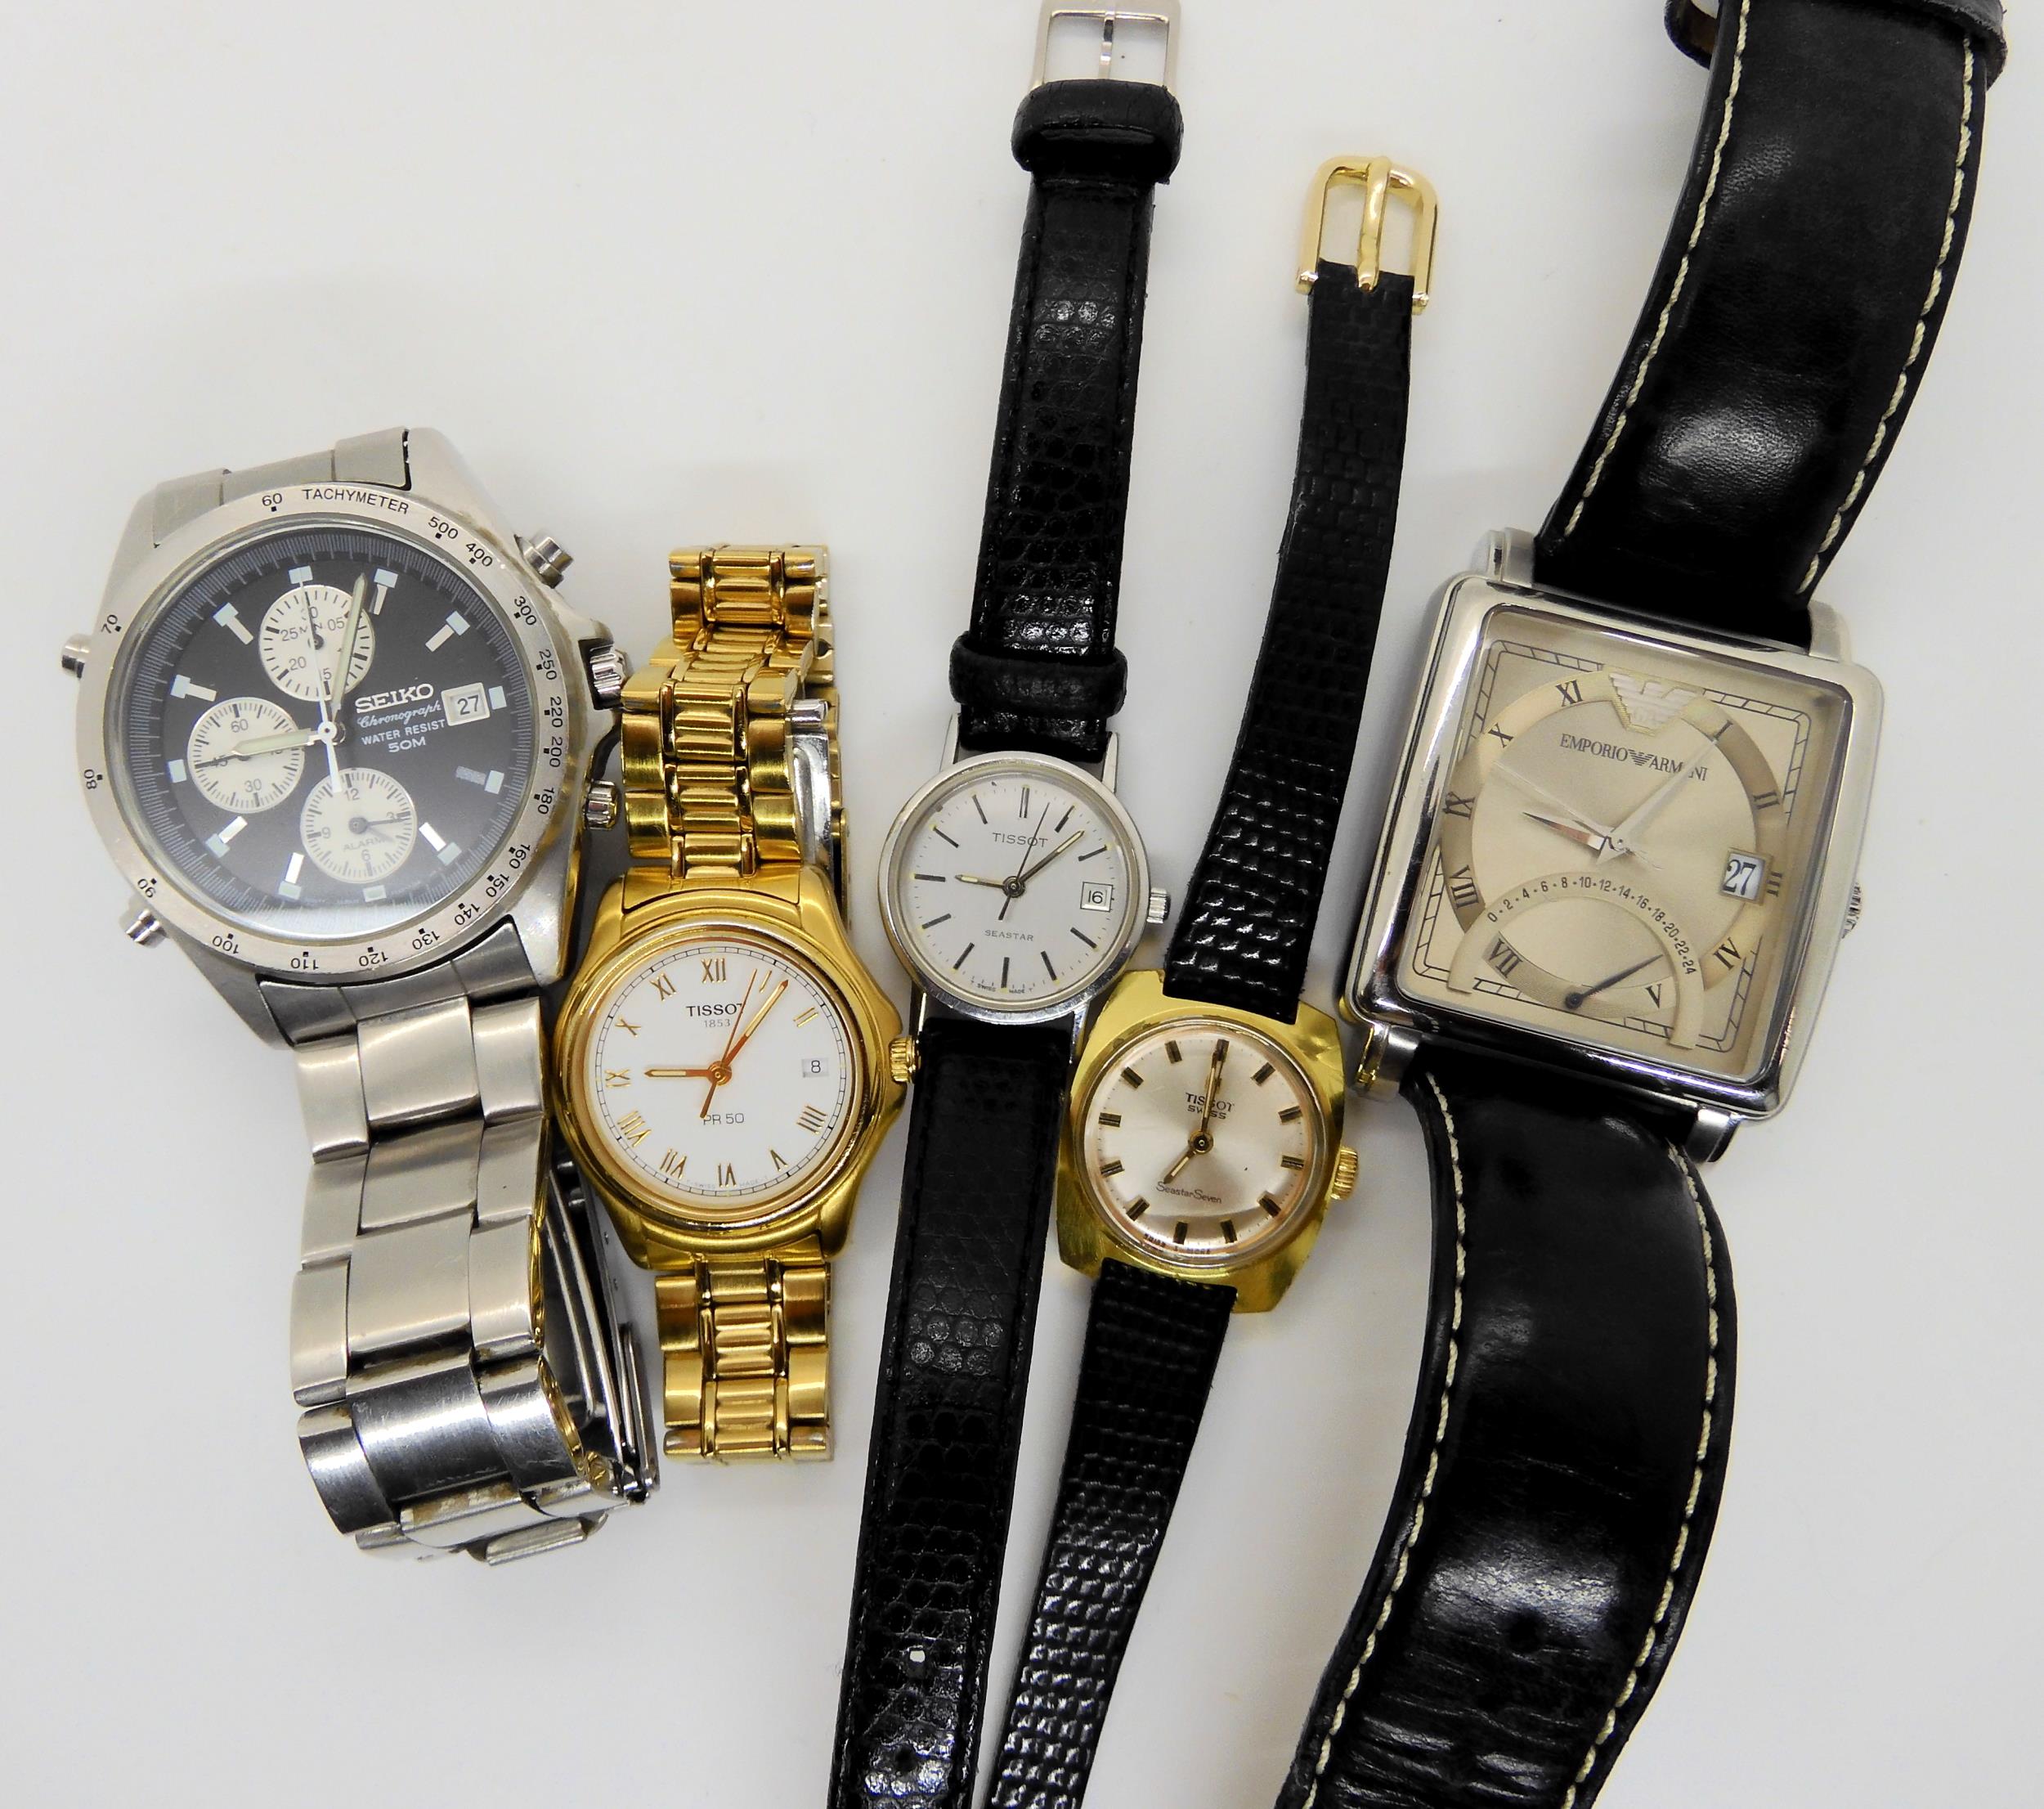 Three ladies tissot watches to include Seastar 7, Seastar, PR50, a Gents Emporio Armani watch and